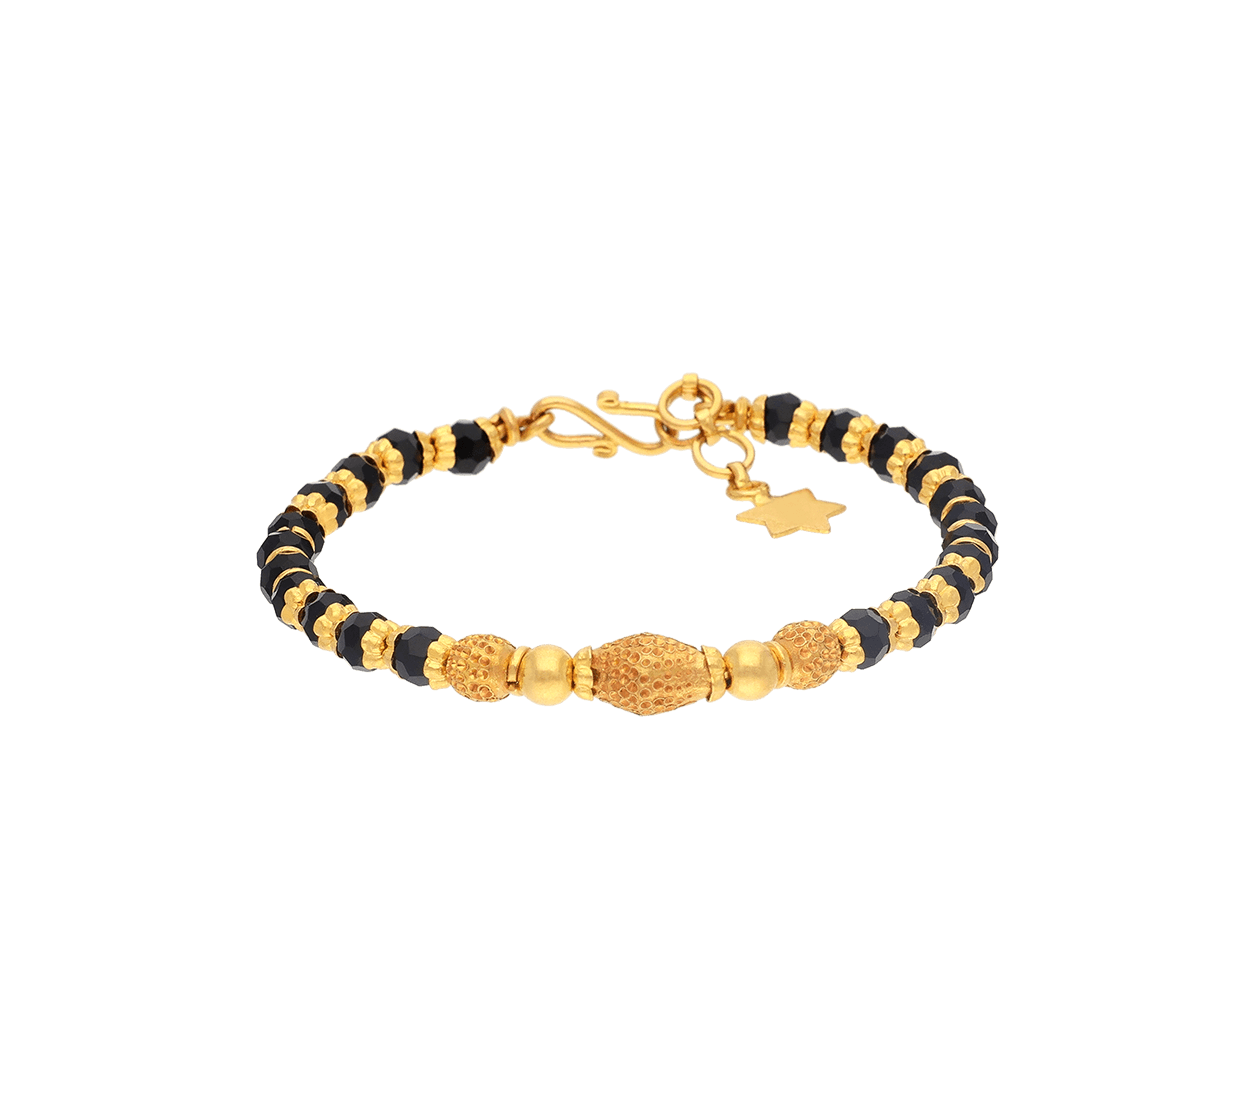 Jos Alukkas on Instagram: “Every day is a new feeling, a new experience.  How do you plan your look for each da… | Gold bangles design, Bangle  designs, Gold jewelery